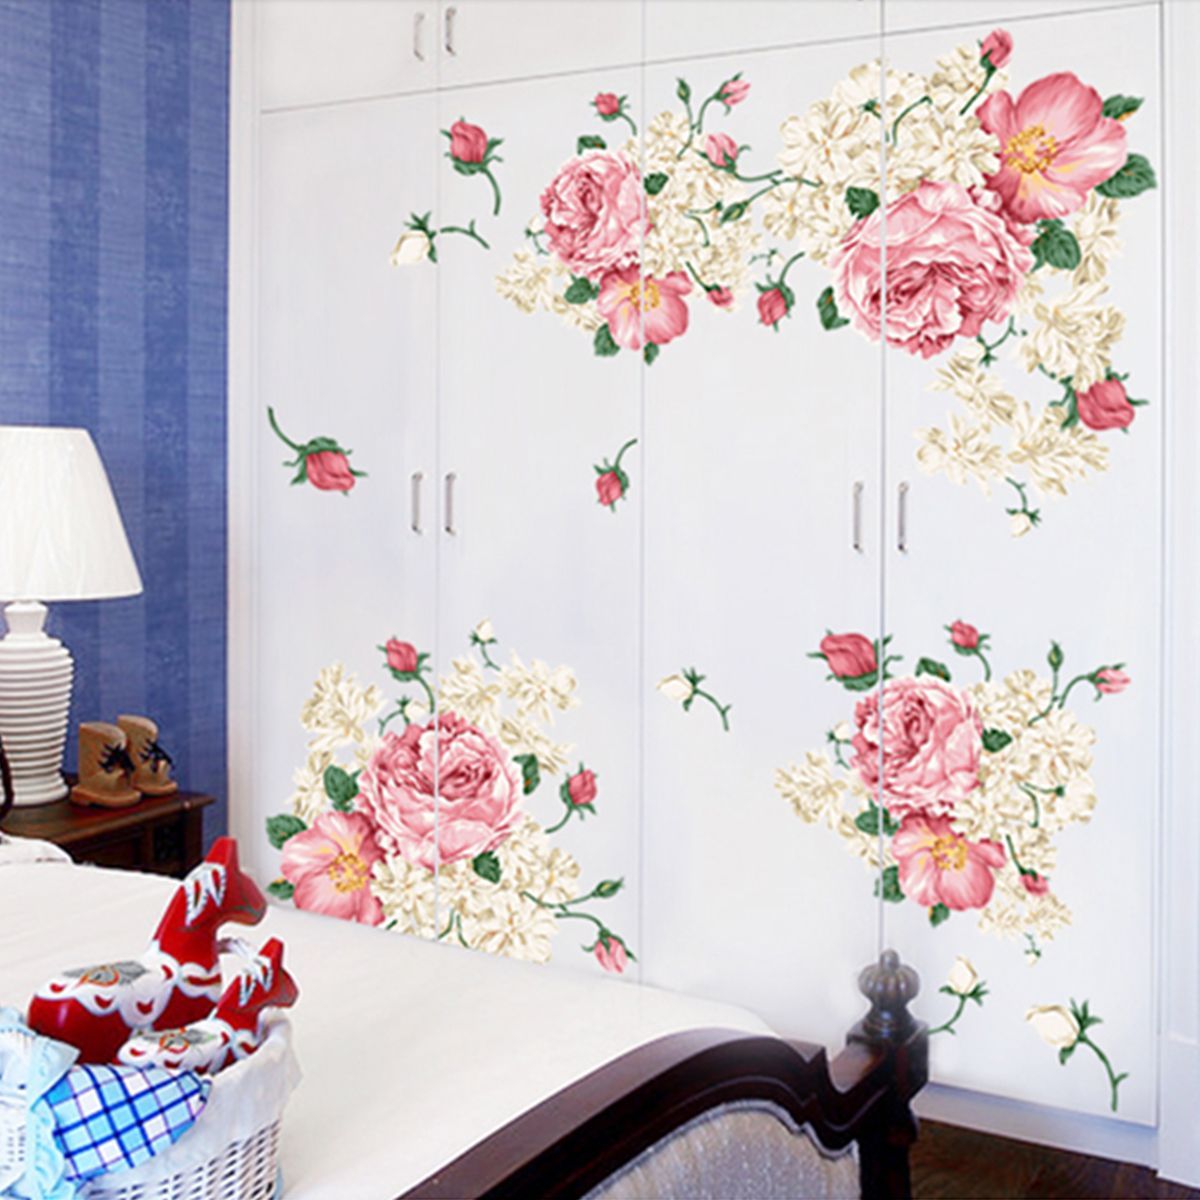 Pink-Peony-Rose-Flower-Blossom-Wall-Stickers-Kids-Baby-Room-Art-Decorations-1561408